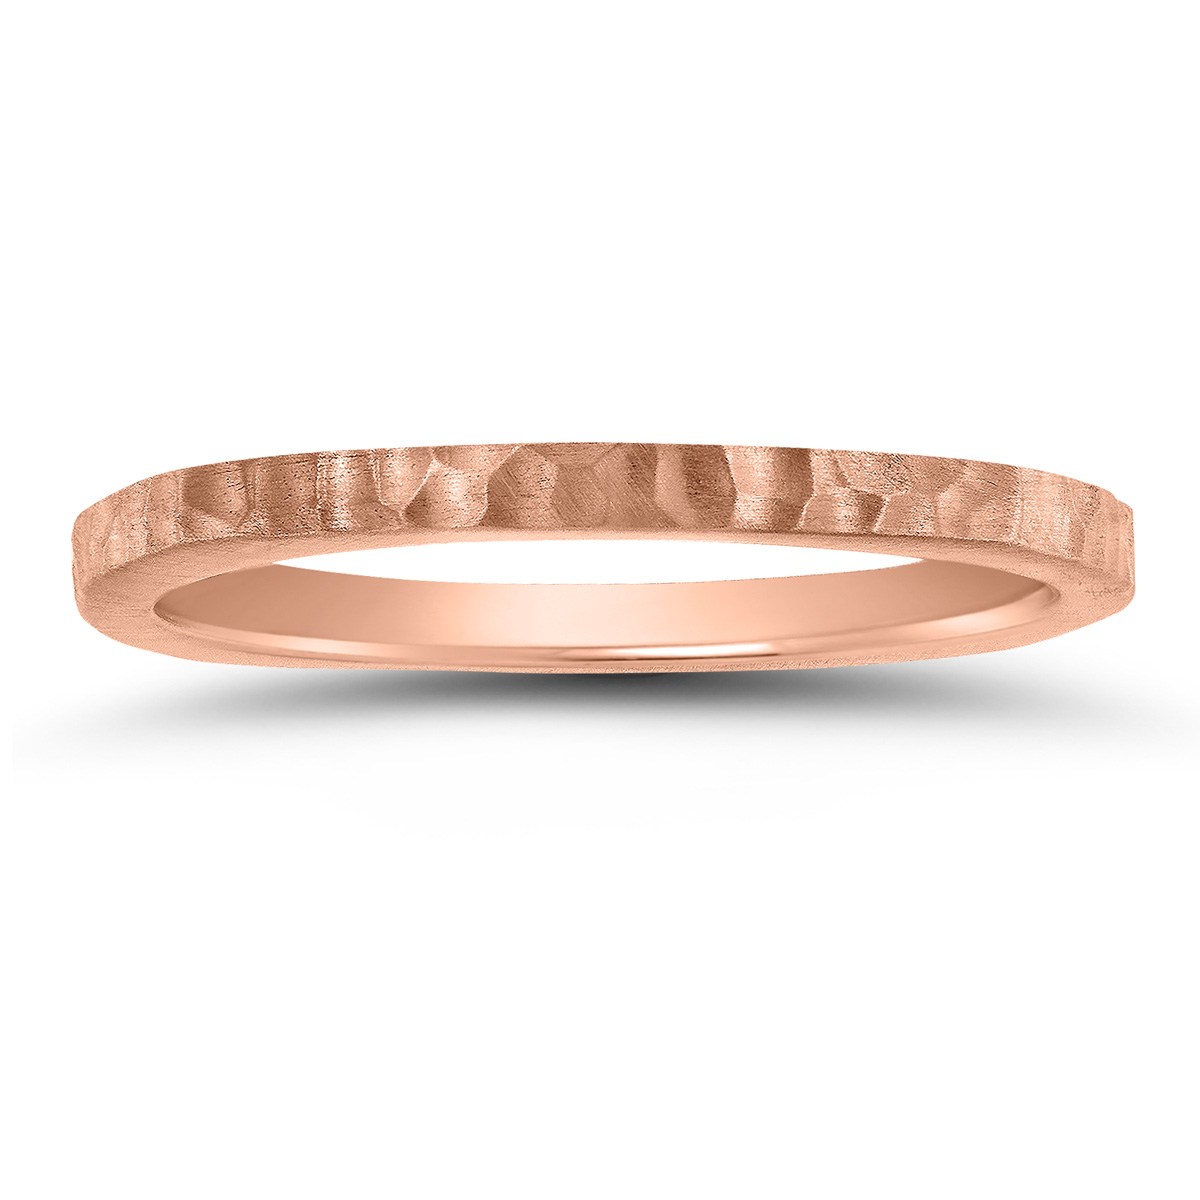 Women's 4 Sided Thin 1.5MM Hammered Wedding Band in 14K Rose Gold